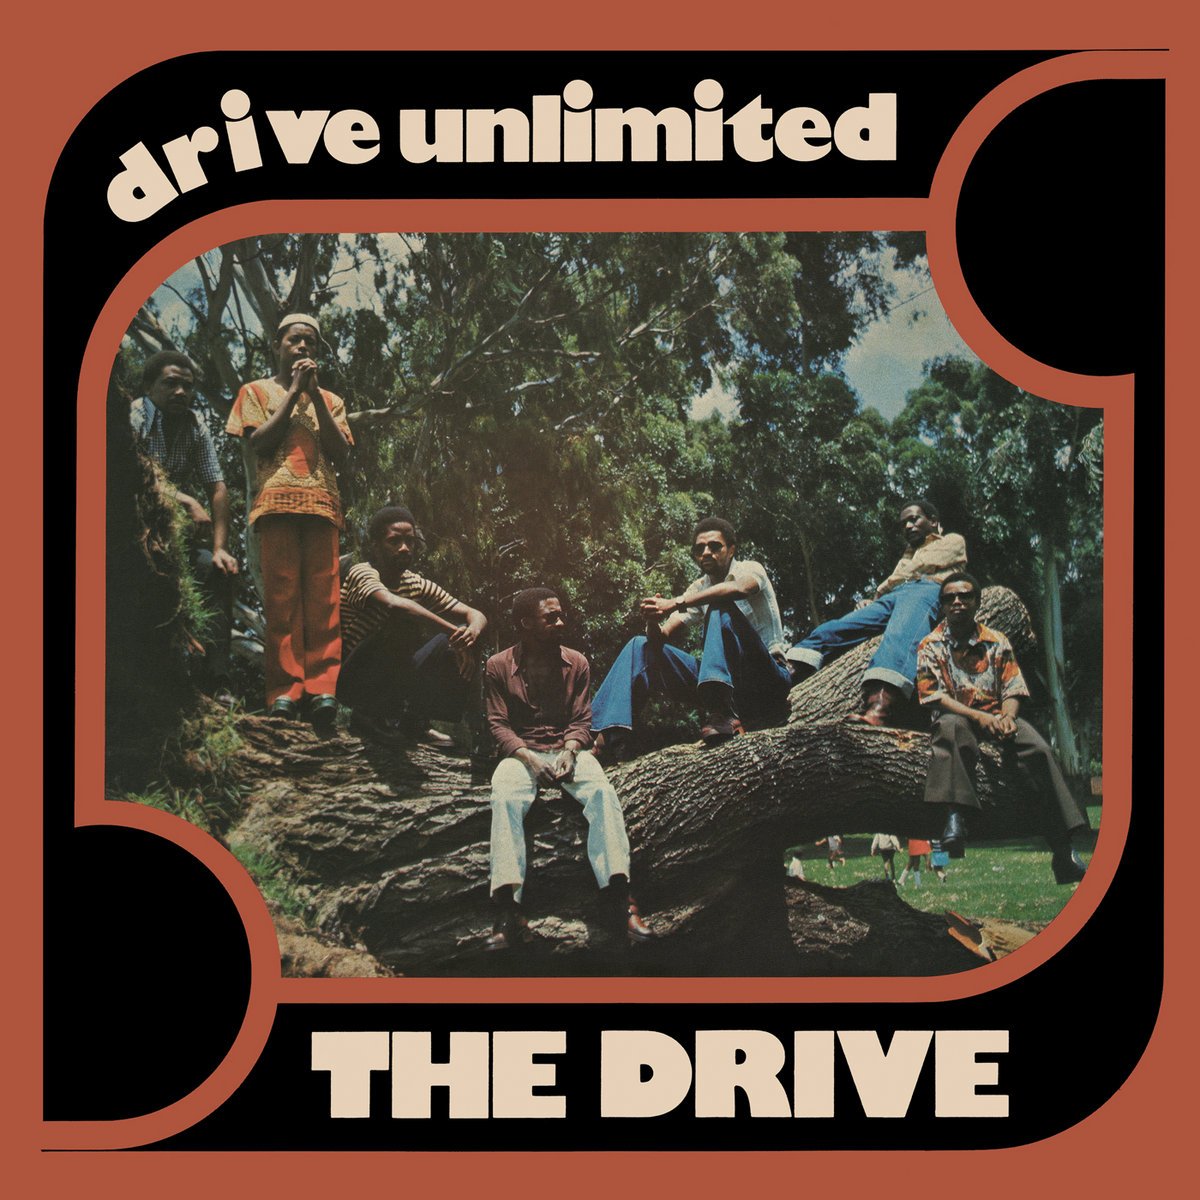 Drive, The "Drive Unlimited"